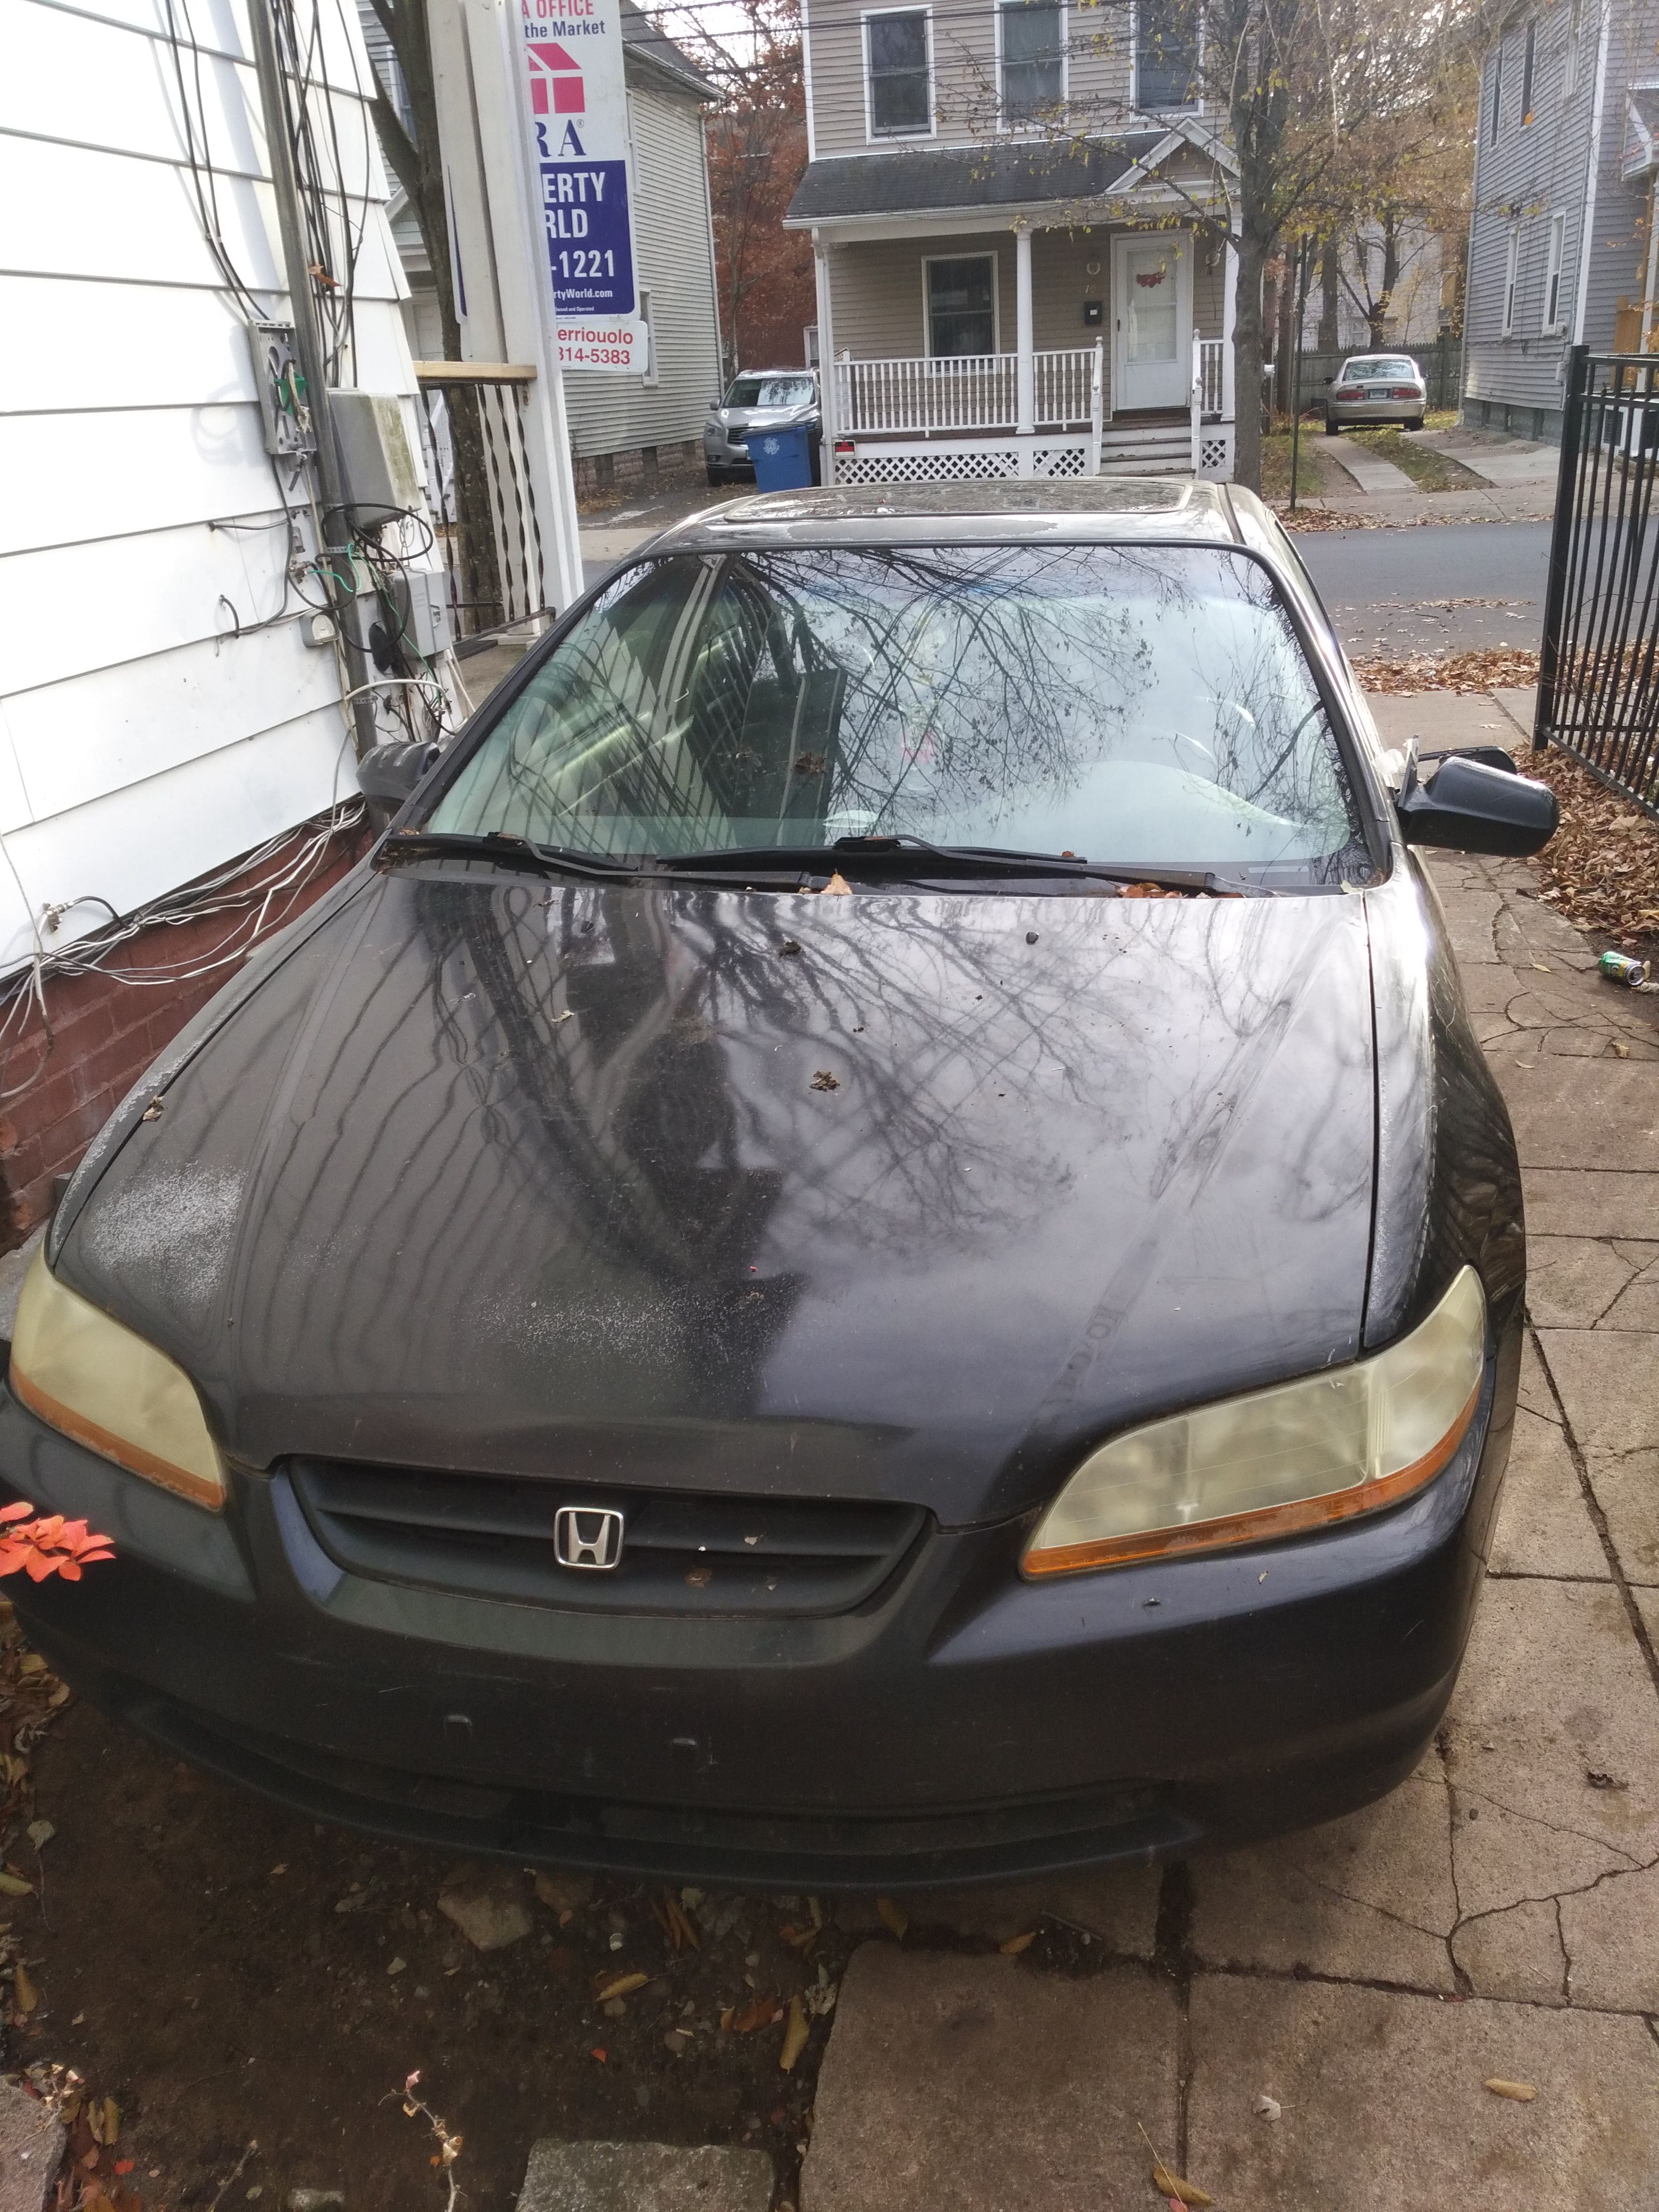 Honda Accord needs breaks and a tune up and jump and some gas also air in the tires